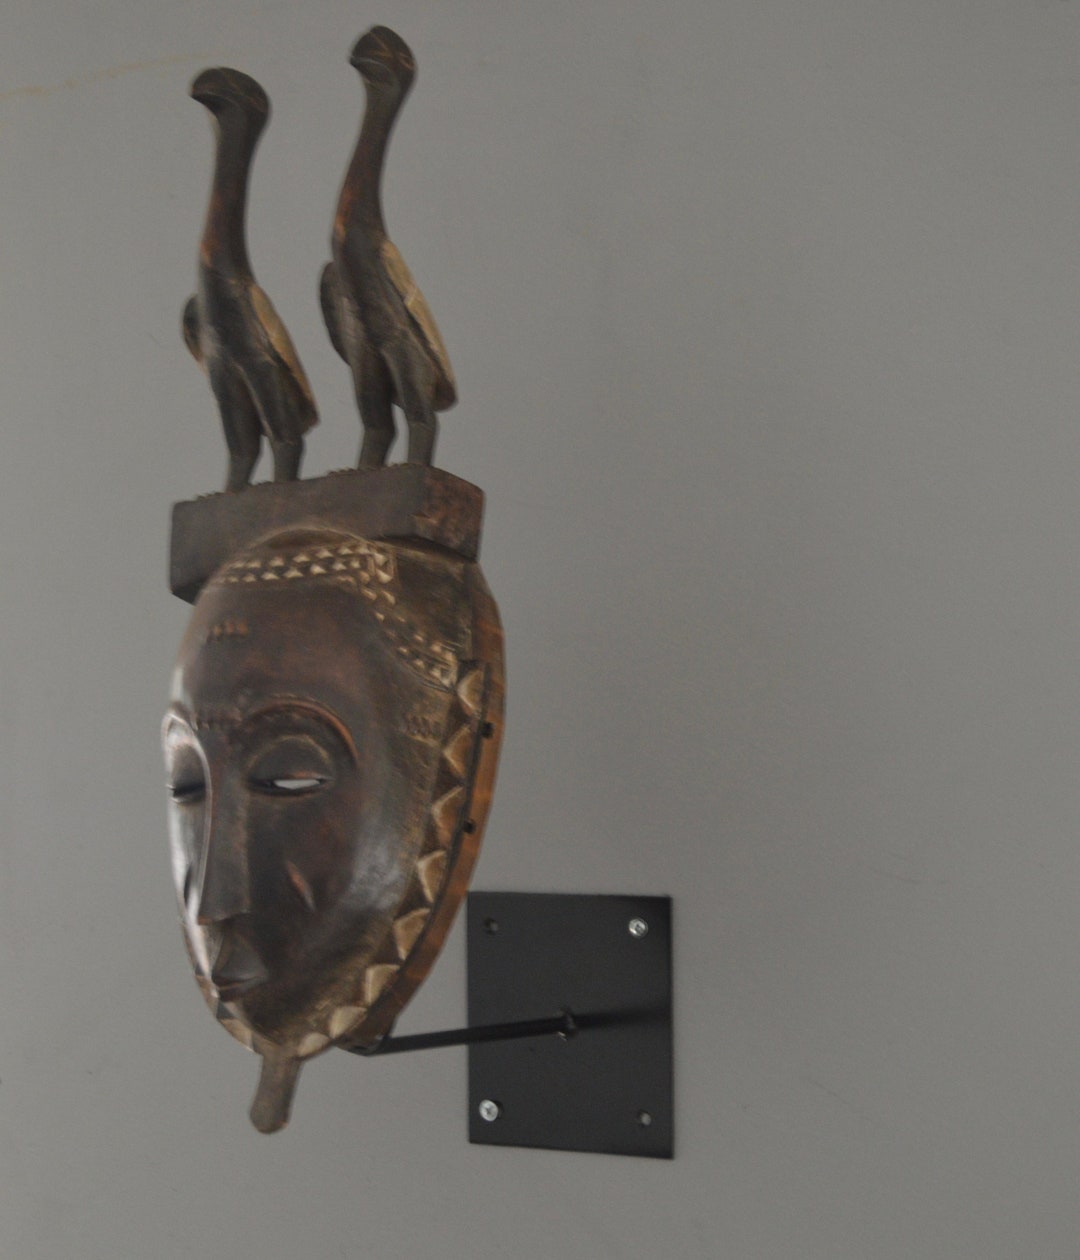 Metal Mask Stand for Displaying Hanging Objects on a Flat Surface